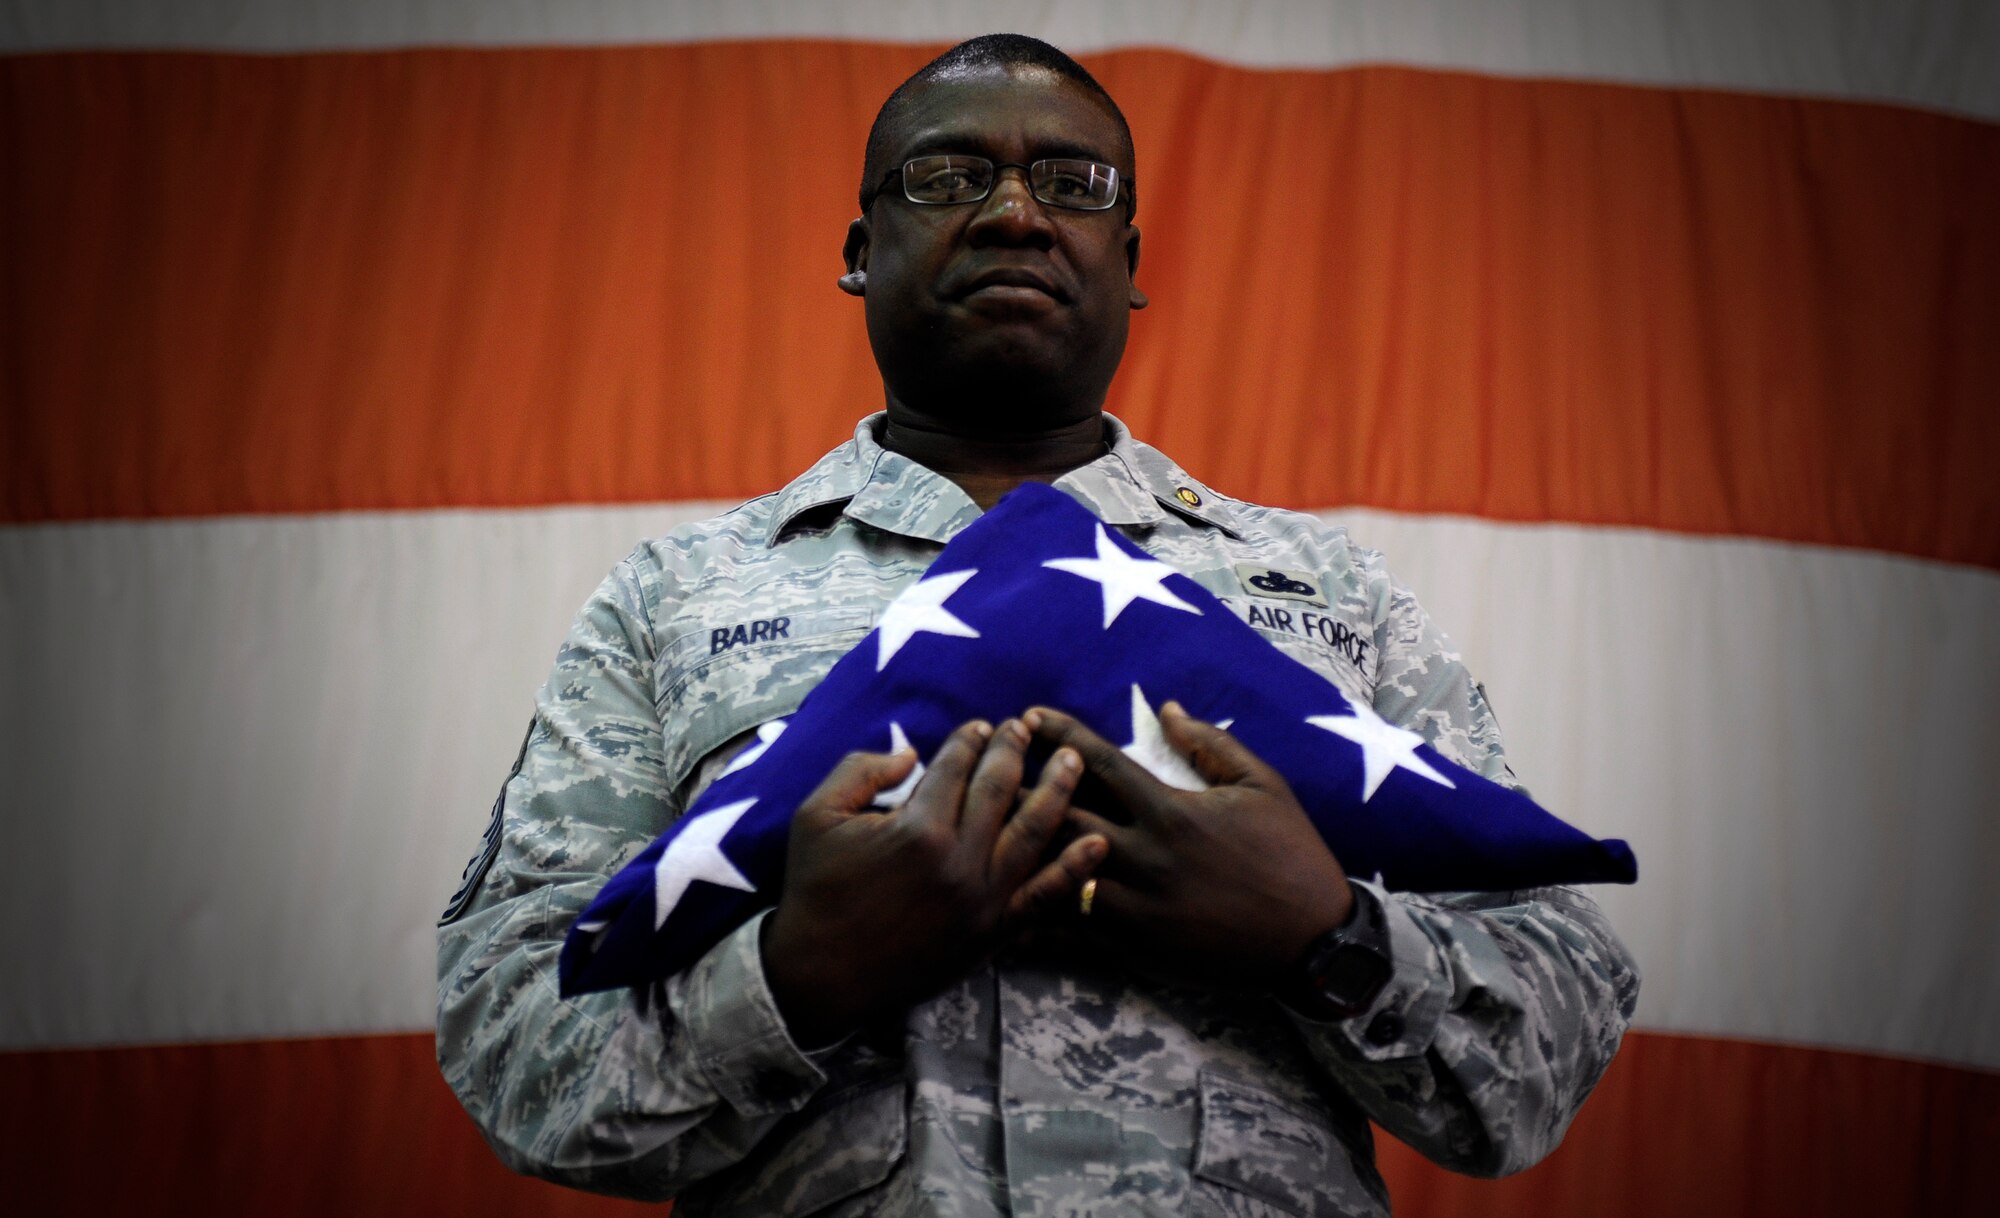 Chief Master Sgt. Lee Barr, 8th Fighter Wing command chief, holds an American flag folded by the 8th FW honor guard as part of his retirement ceremony at Kunsan Air Base, Republic of Korea, May 12, 2015. Barr spent 22 years in the security forces career field while supporting and deploying in Operations Desert Shield and Storm, Southern Watch, Noble Eagle, Iraqi Freedom and Odyssey Dawn. He will have served in the Air Force for 30 years when he retires in November. (U.S. Air Force photo by Senior Airman Taylor Curry/Released)